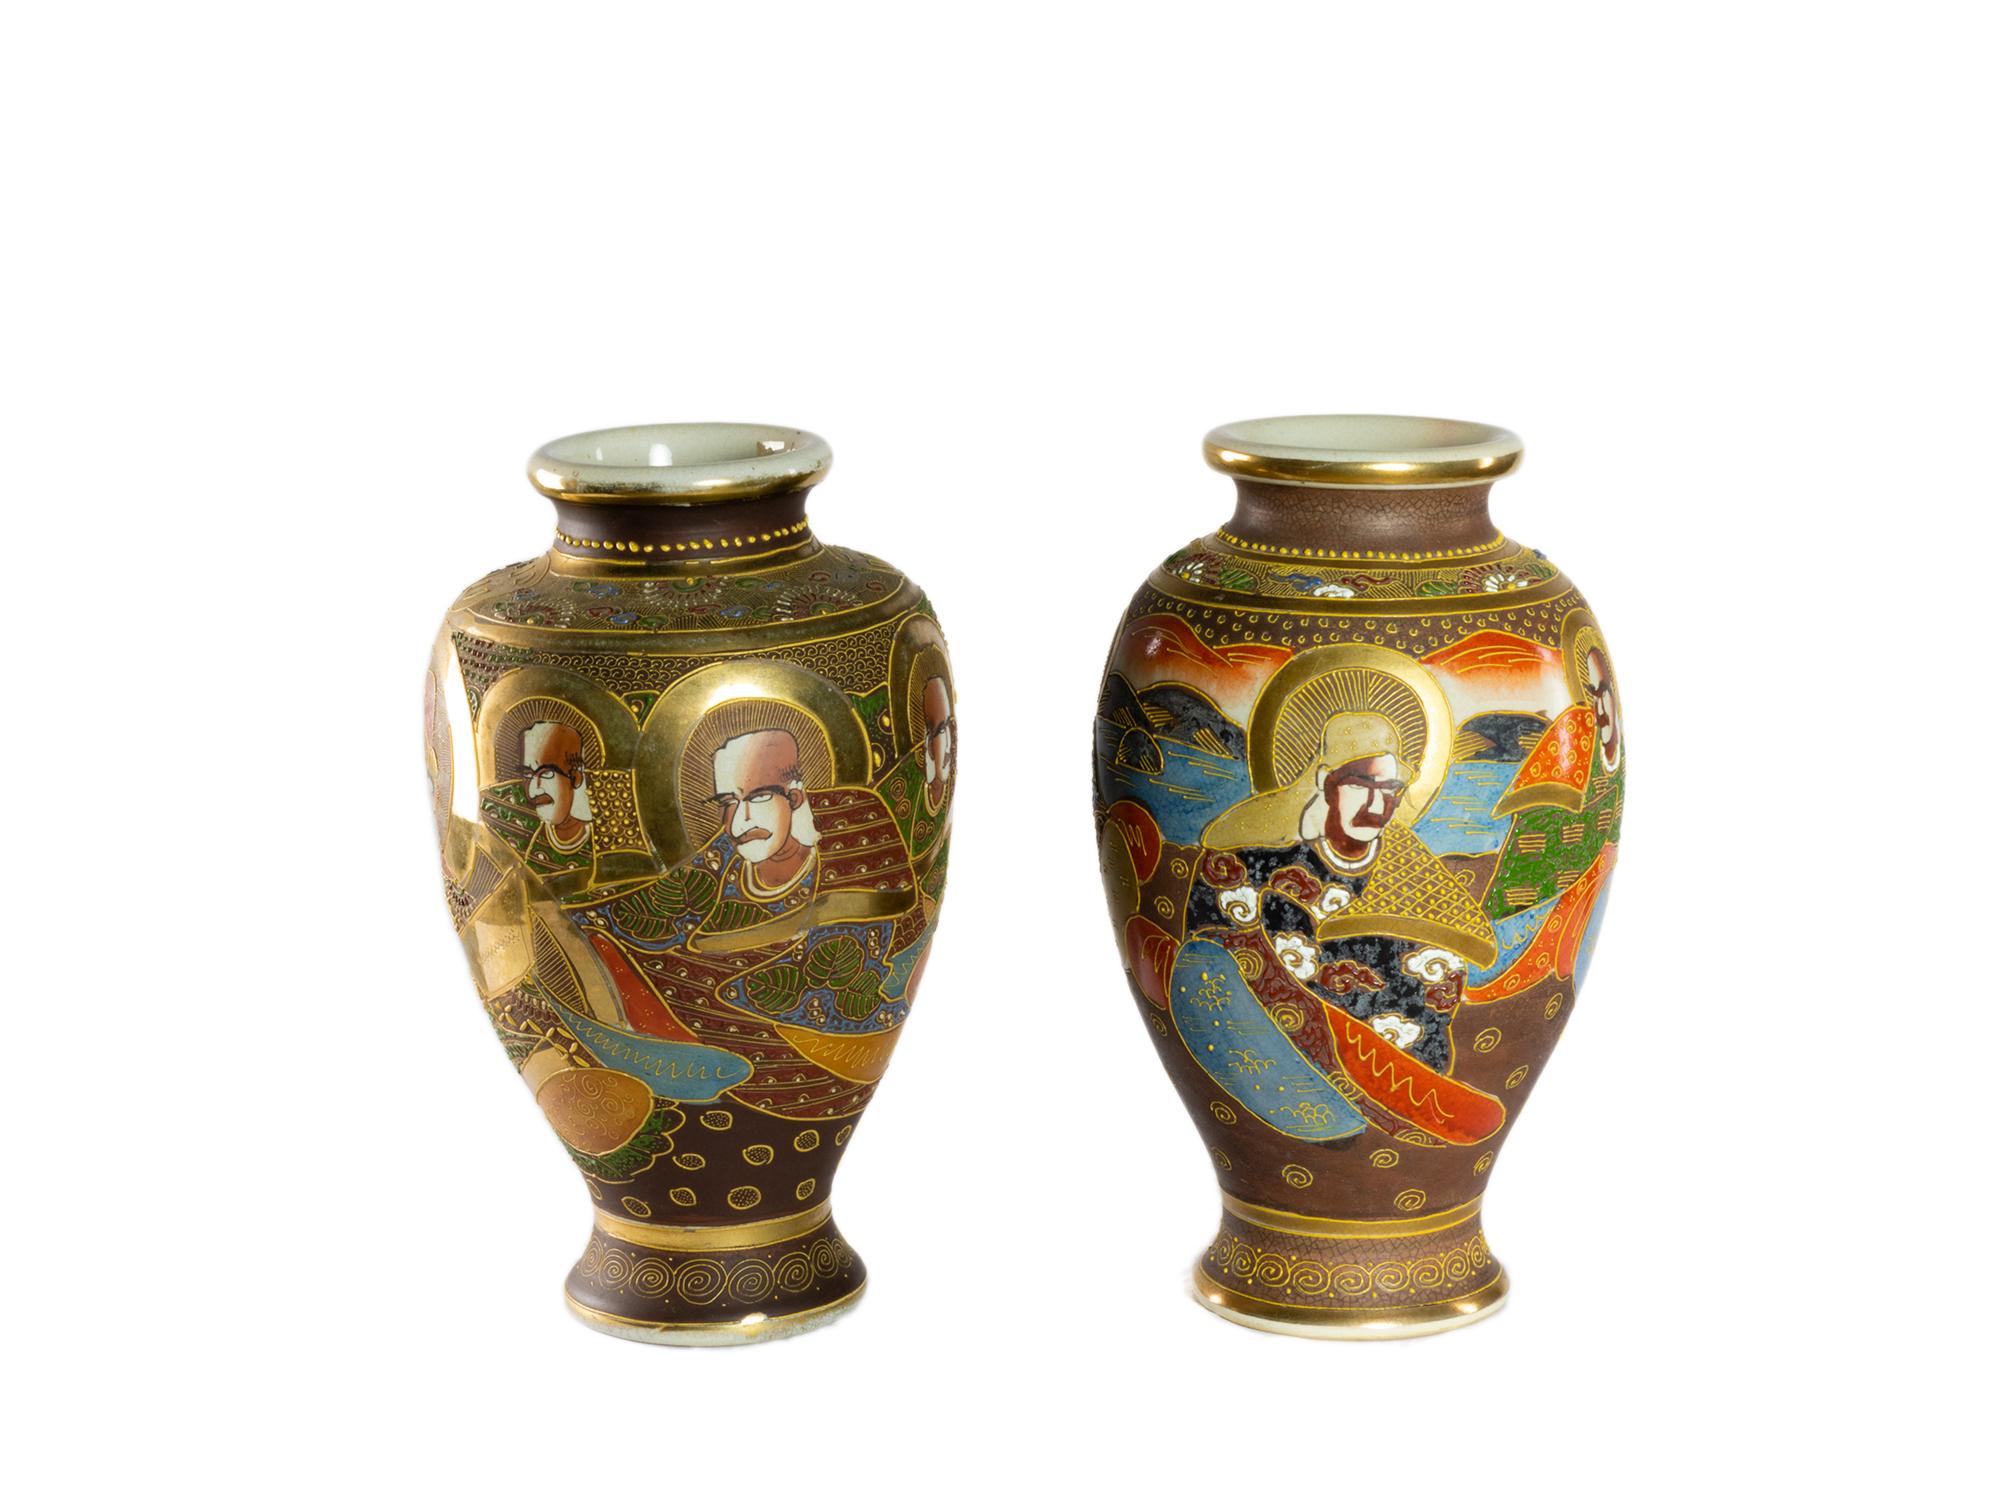 A pair of signed Sbei Kinkzan VII Satsuma polychrome porcelain vases with gold standard (kinrande) from Kyoto, Imperial City, Japan. Kyo Satsuma ceramics contain intricately detailed paintings that are wonderfully done in multicolored glazes and